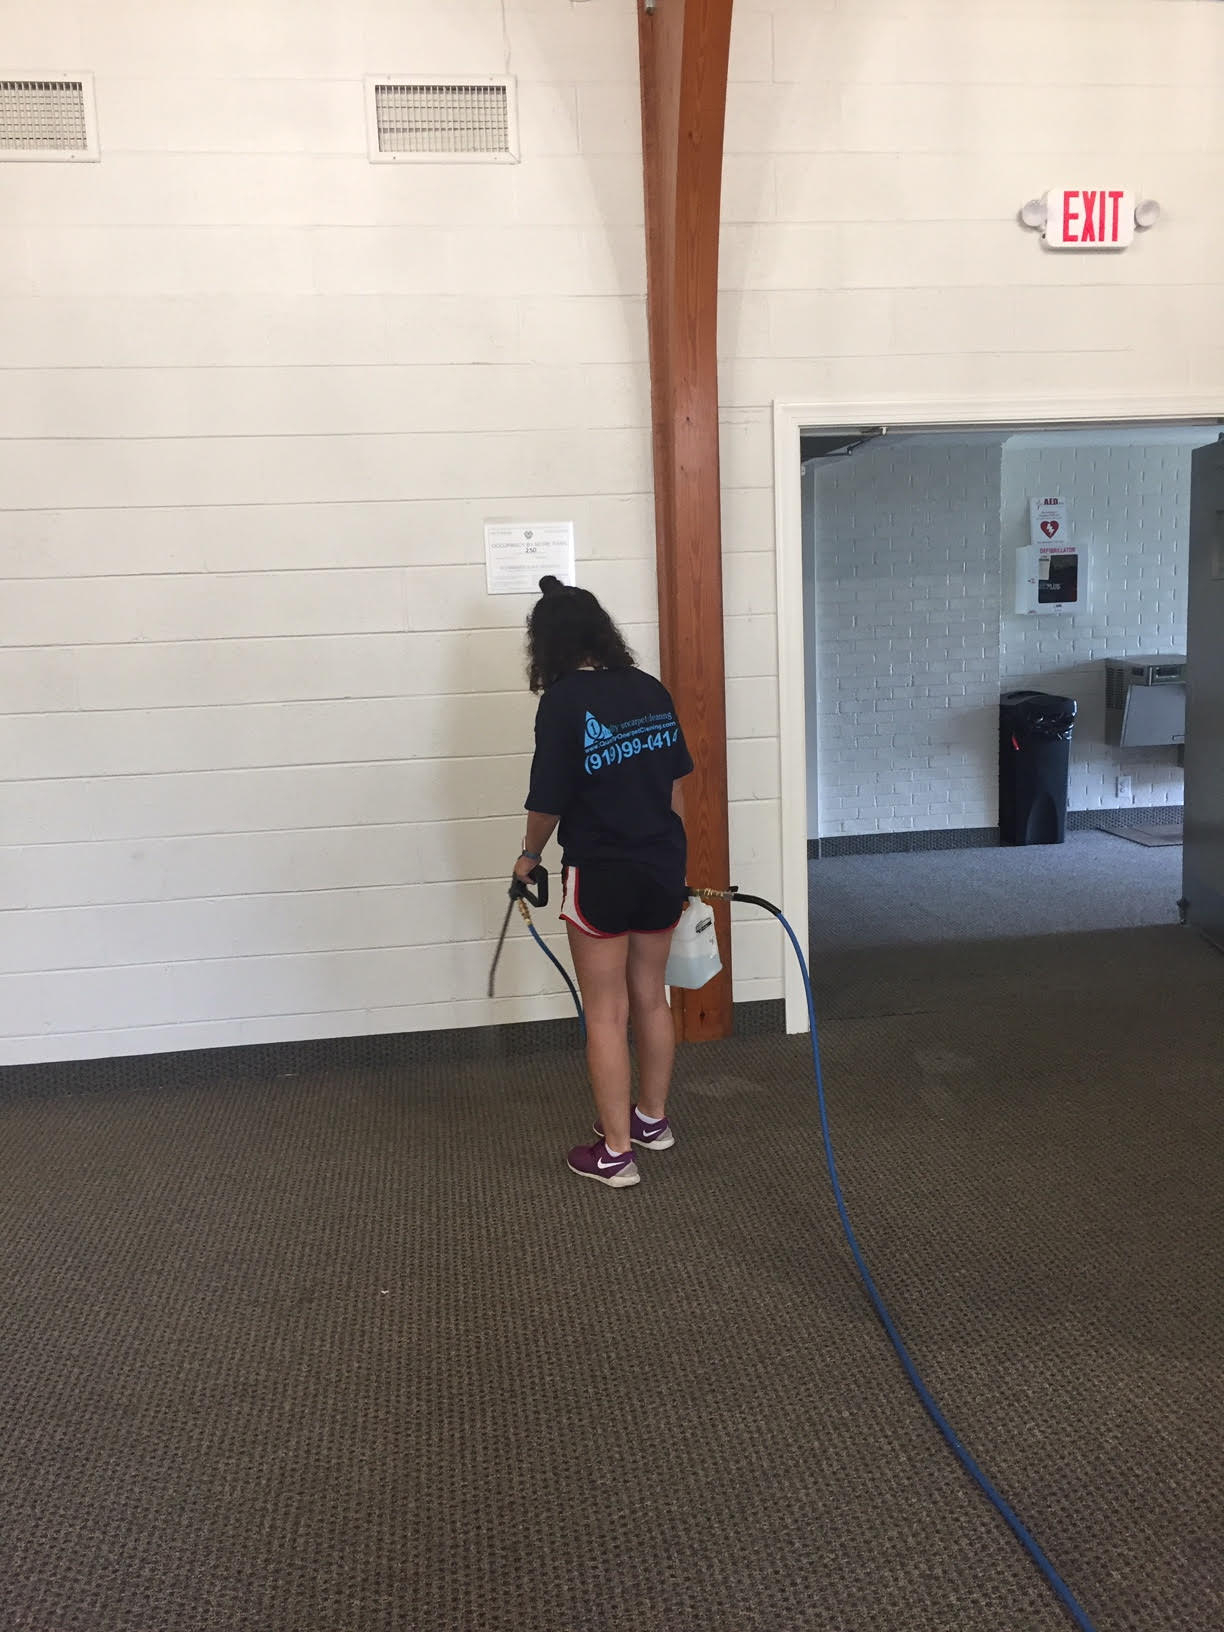 Commercial Carpet Cleaning Raleigh Nc - Quality One Carpet serapportantà Carpet Cleaners Pitt County Nc